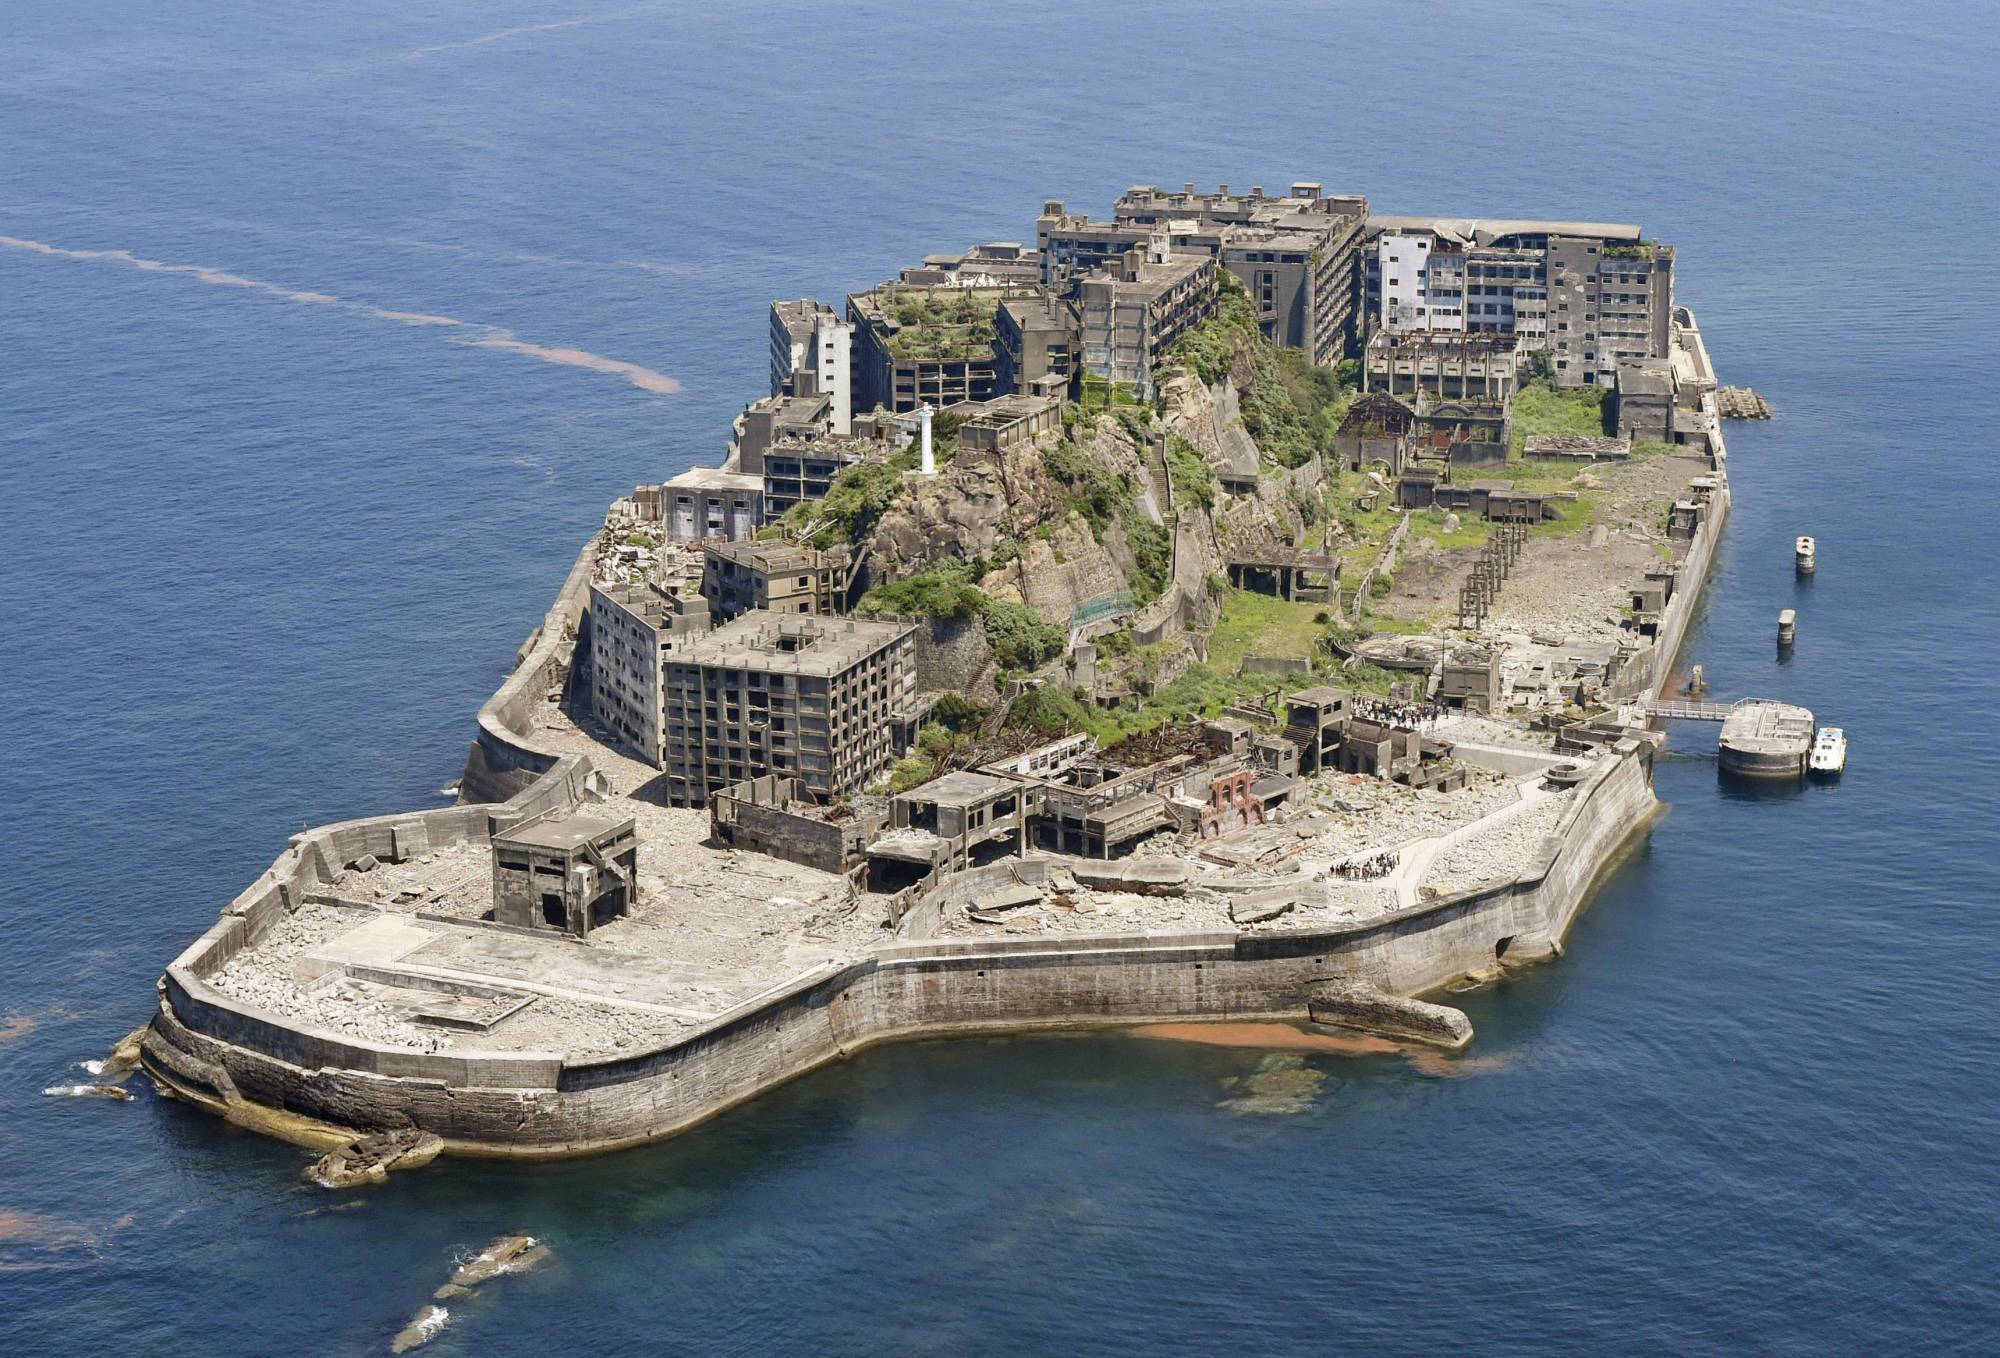 The Hashima Coal Mine in Nagasaki Prefecture, known as 'Battleship Island' because of its shape, is one of the 23 sites spanning eight prefectures that were added to the World Cultural Heritage list in 2015 under 'Sites of Japan's Meiji Industrial Revolution: Iron and Steel, Shipbuilding and Coal Mining.' | KYODO